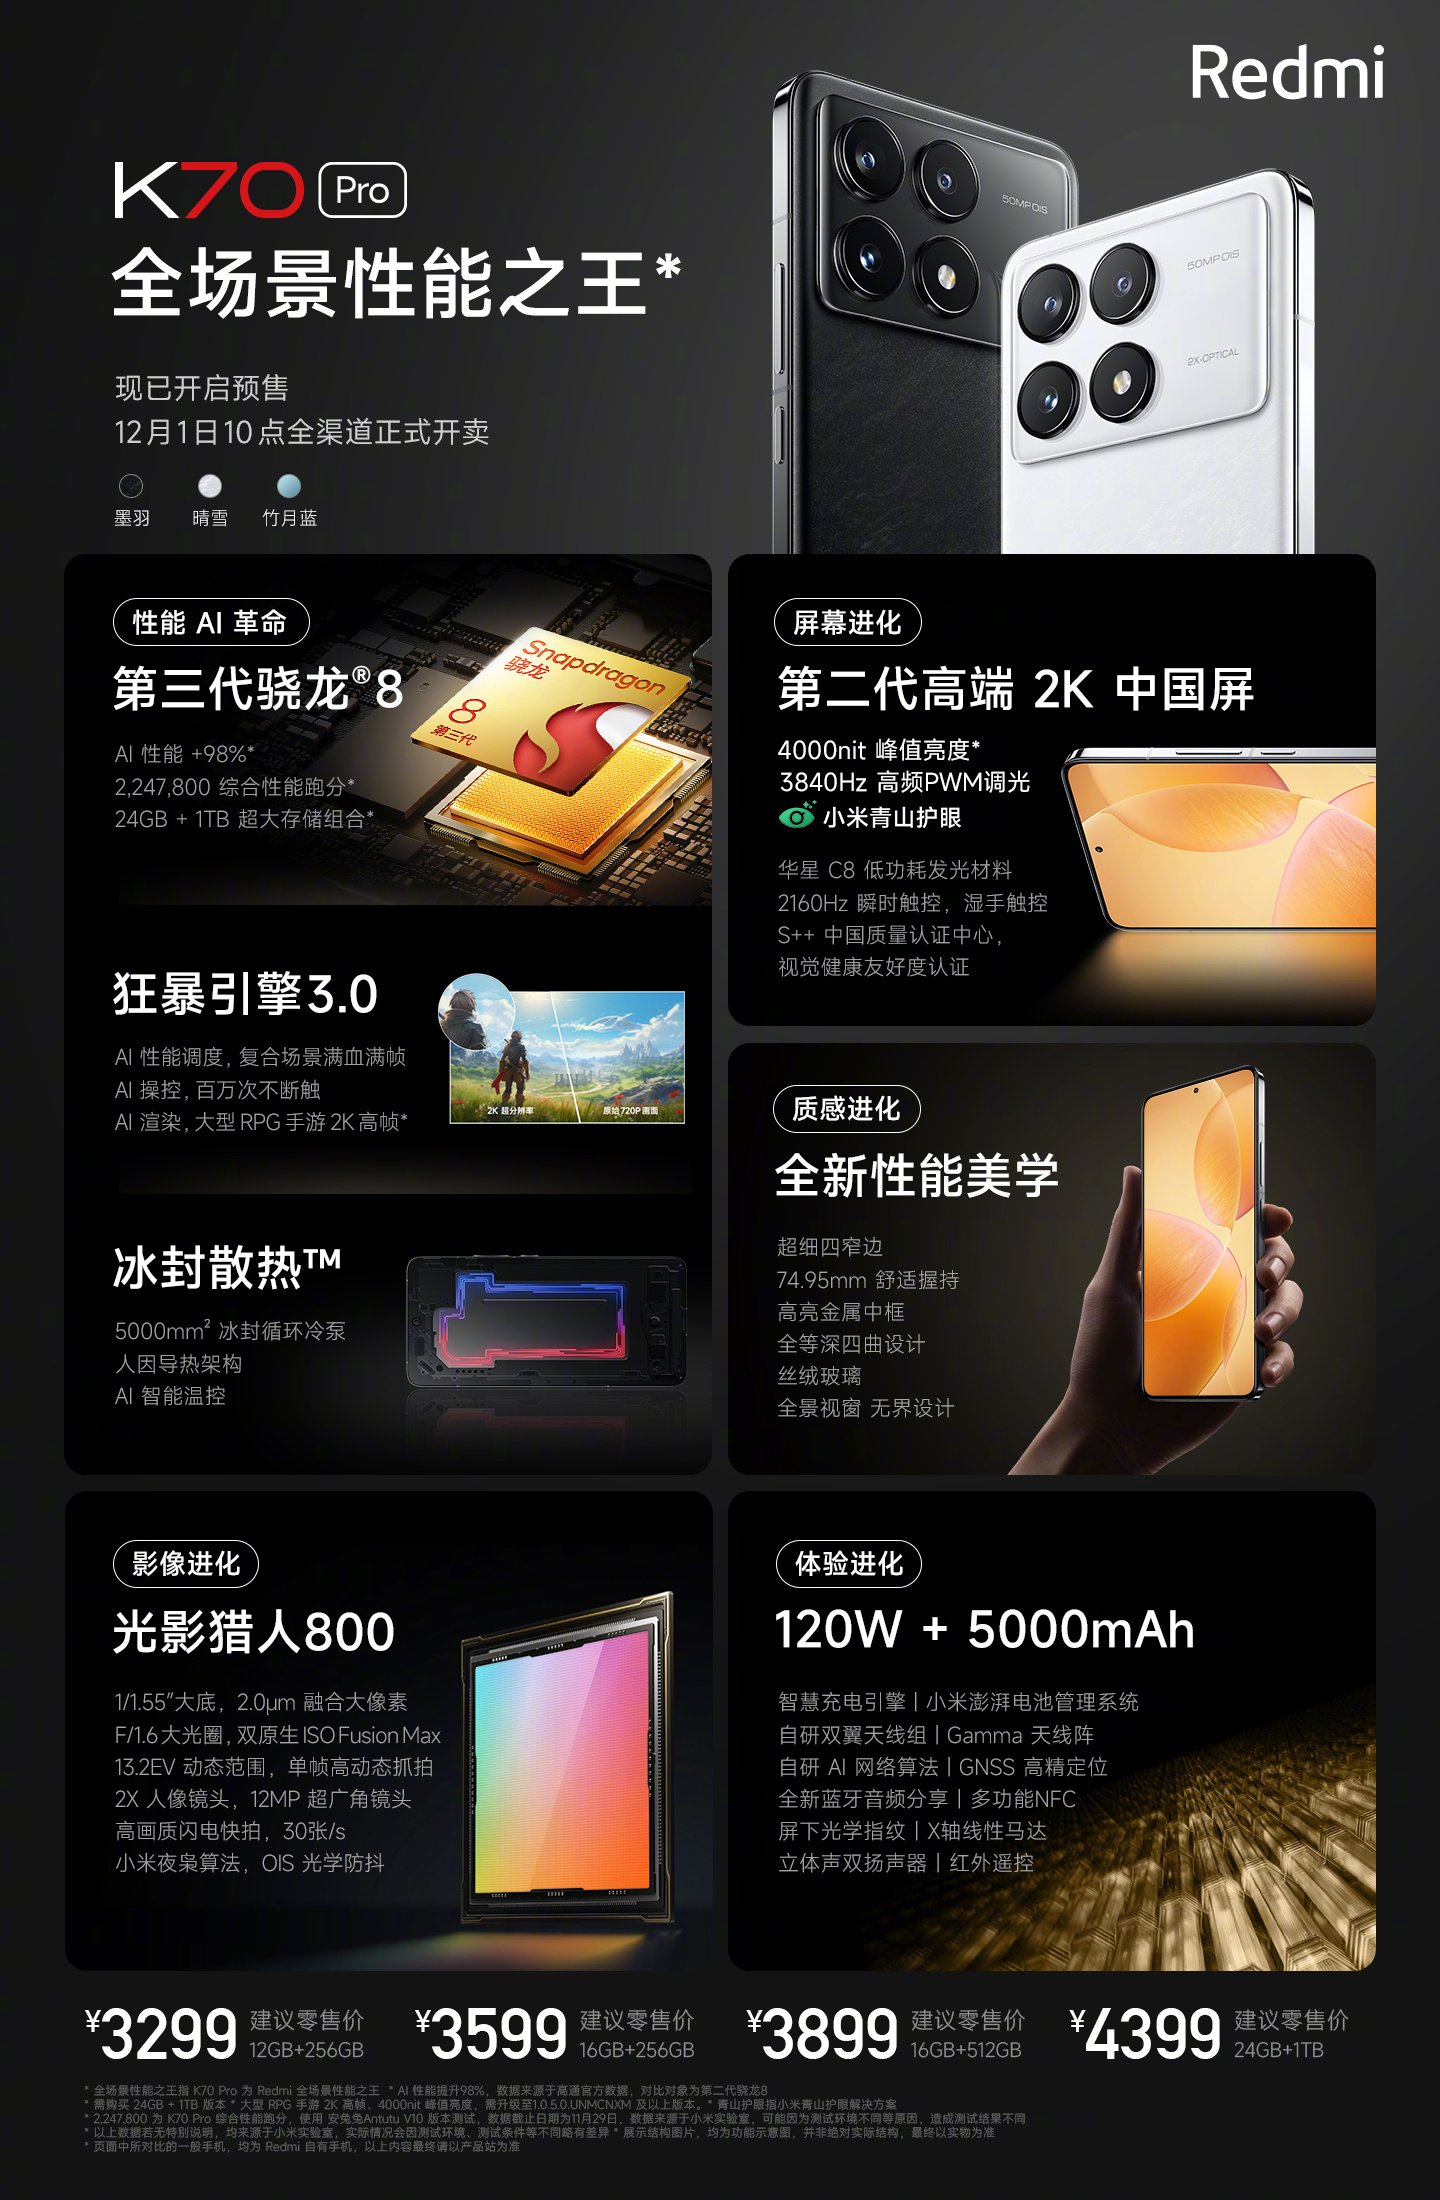 Ishan Agarwal on X: Xiaomi launches Redmi K70 Pro in 🇨🇳 China!  Snapdragon 8 Gen 3 for this price tag 💰 12/256GB: 3299 元/ ₹39,425/$466  16/256GB: 3599 元/ ₹42,336/$508 16/512GB: 3899 元/